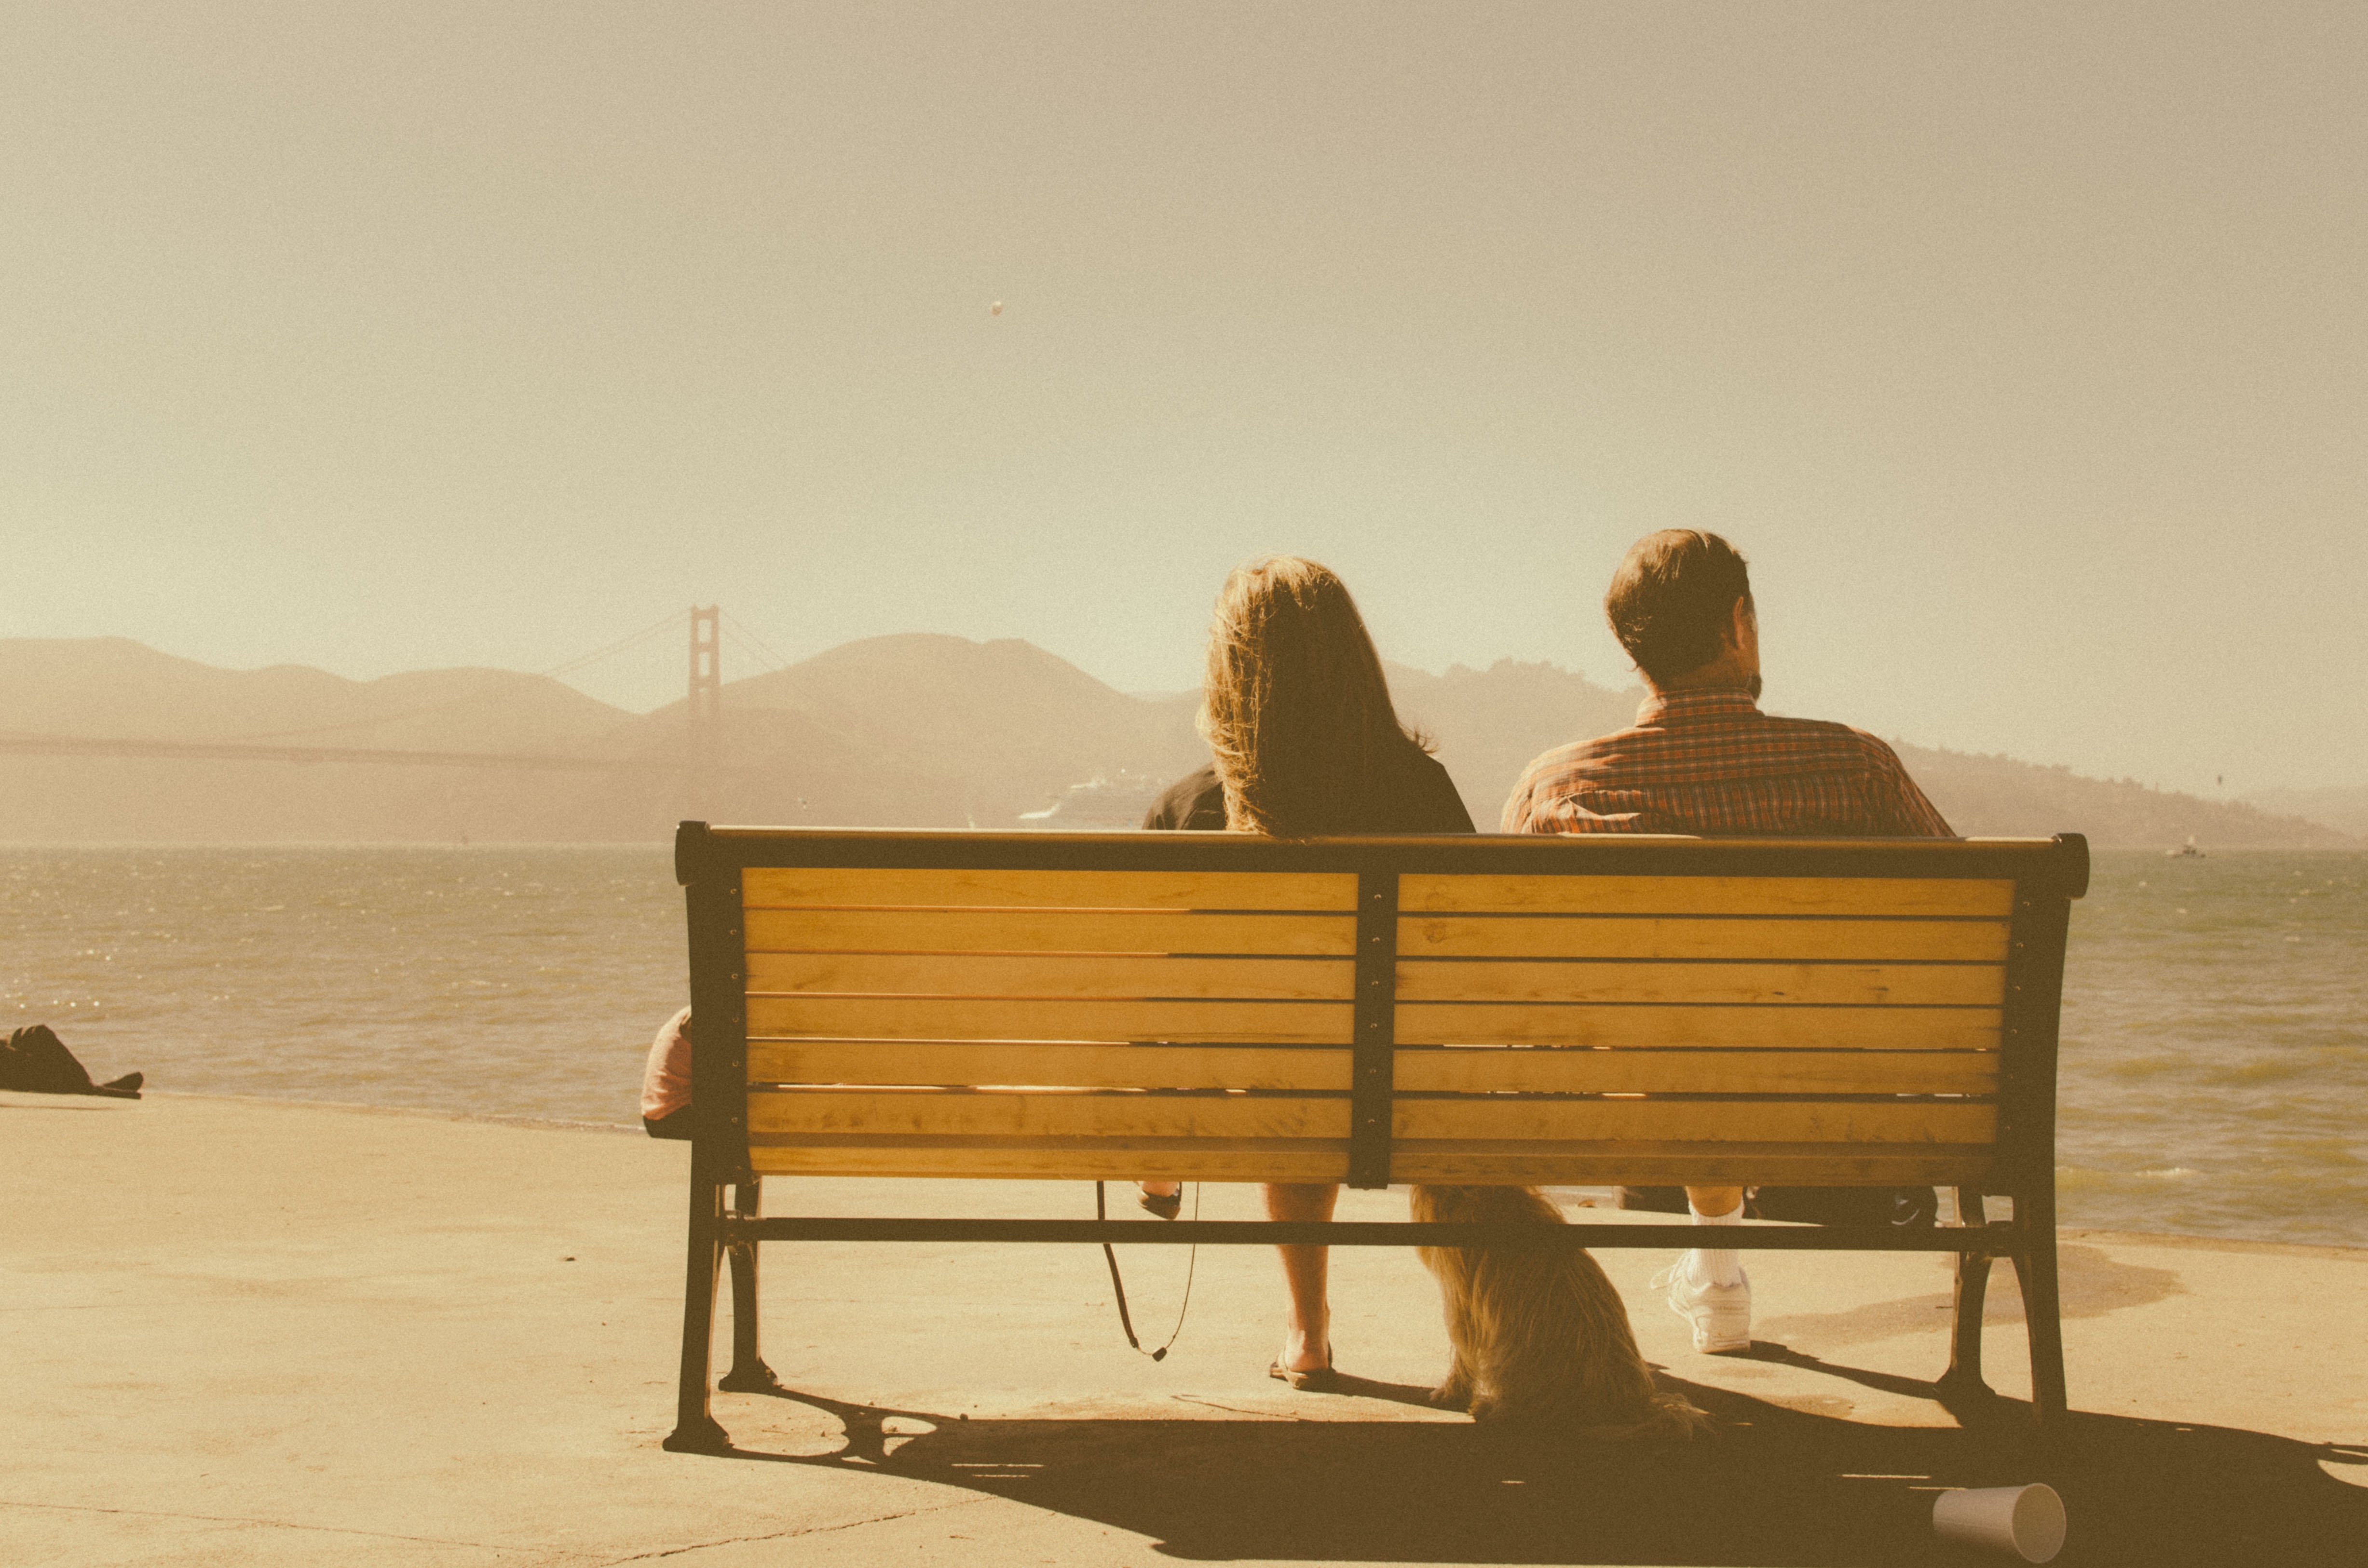 A man and woman sitting on a bench. | Source: Unsplash